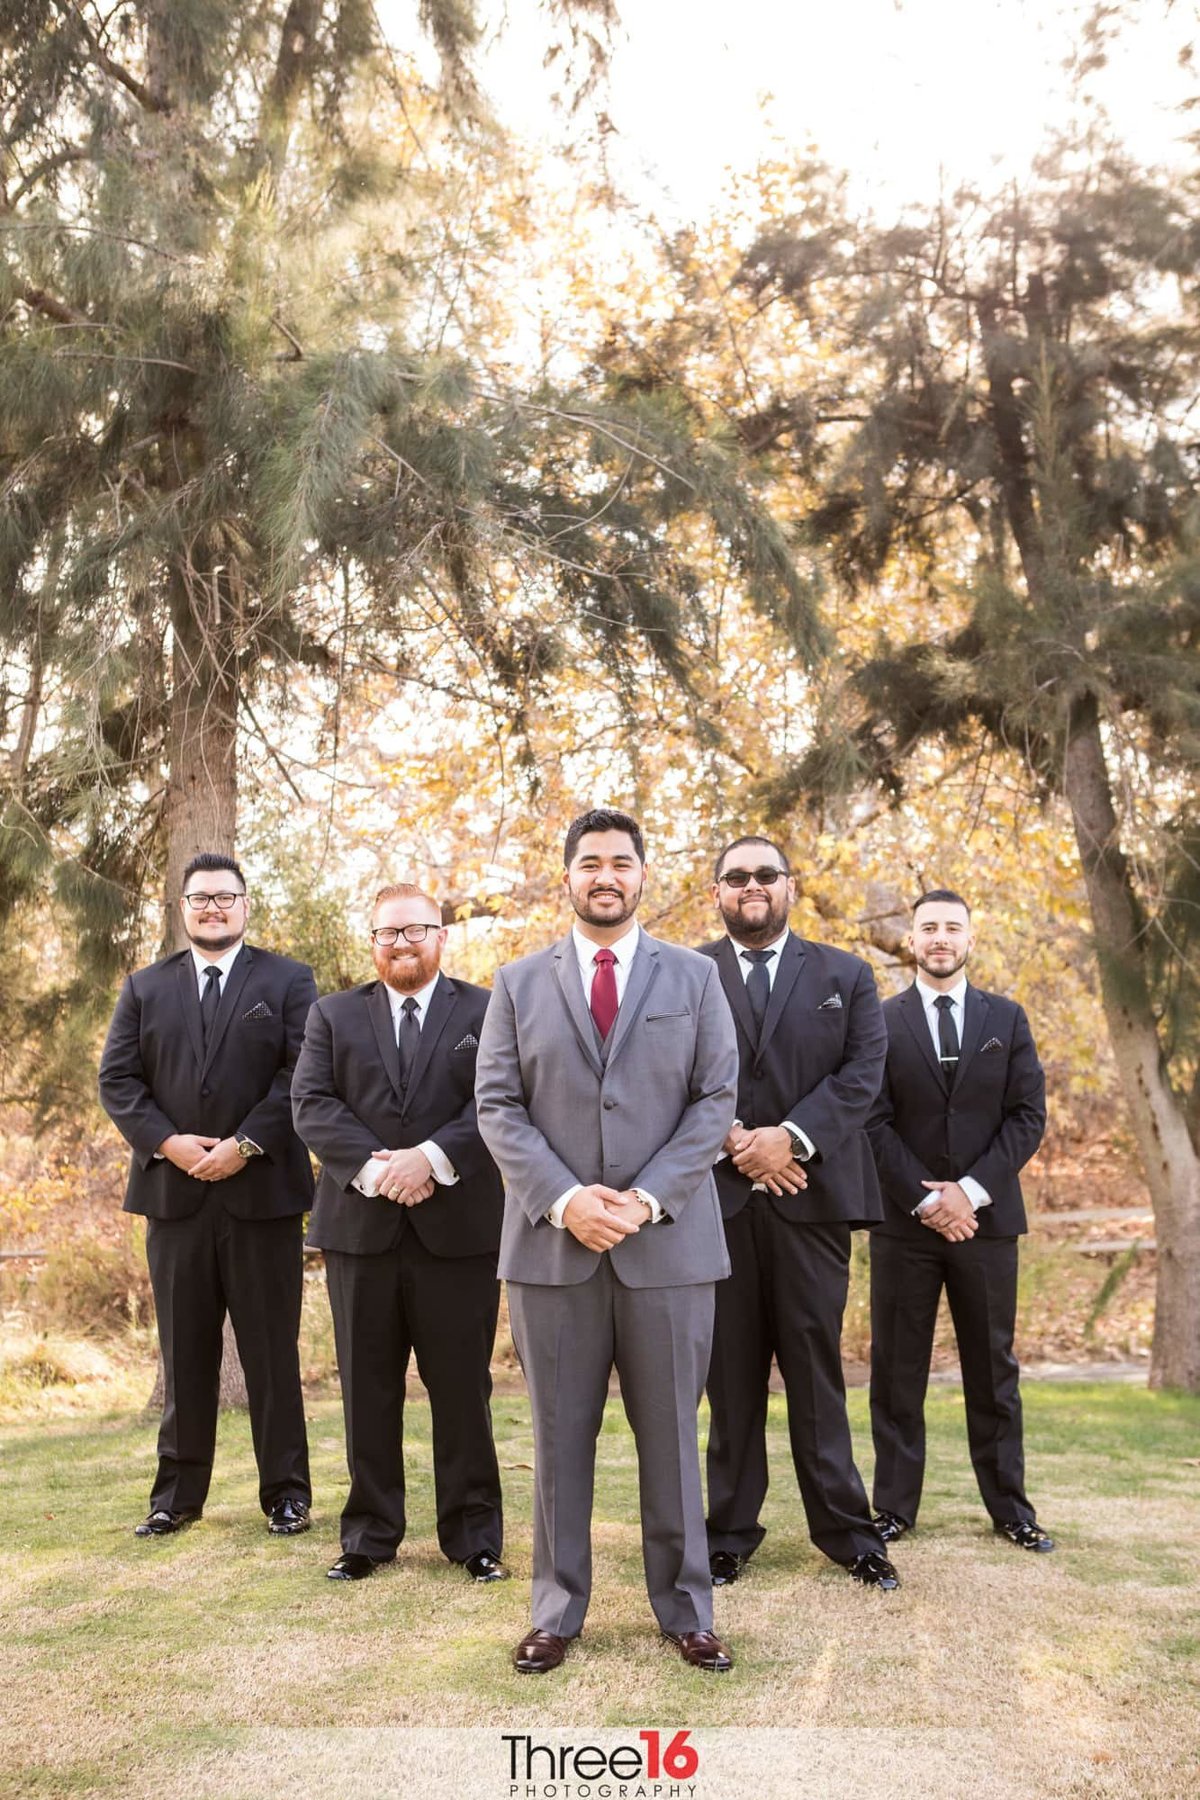 A Groom and his Groomsmen